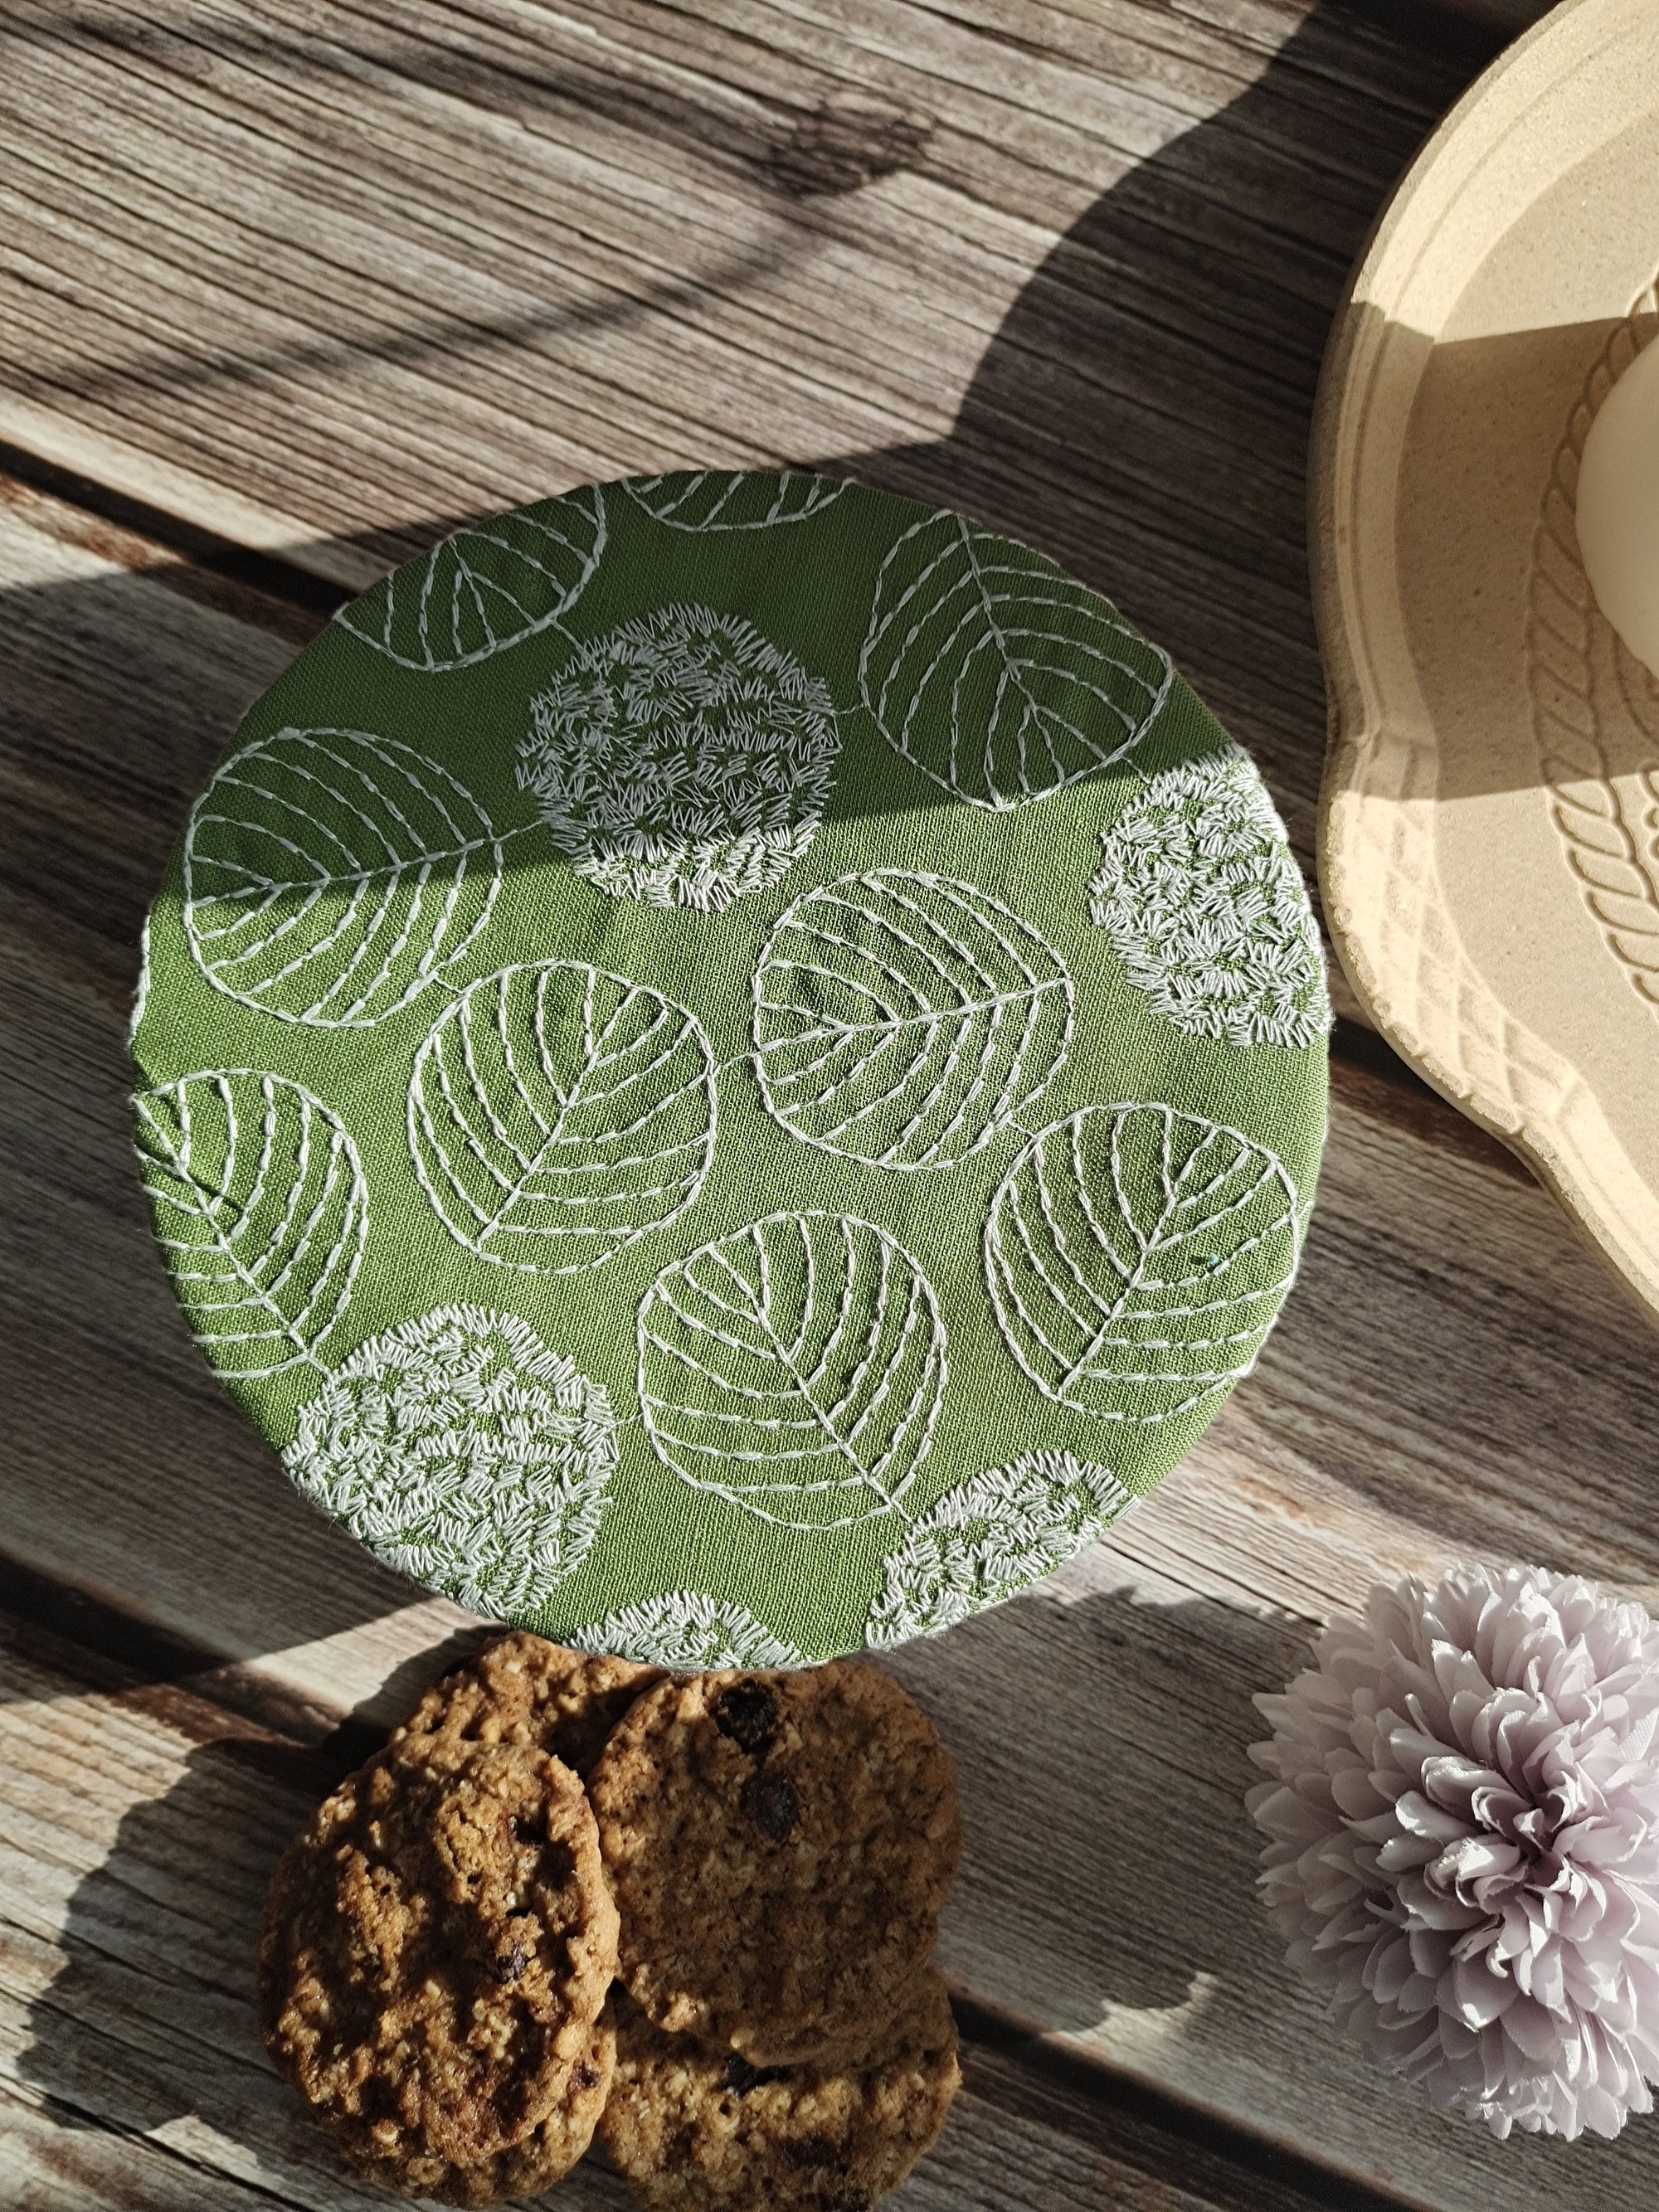 Reusable Bowl Covers Bread Proofing Cover Bread Baking Supplies, Washable Zero Waste Swap, Christmas Gift housewarming embroidery dandelion